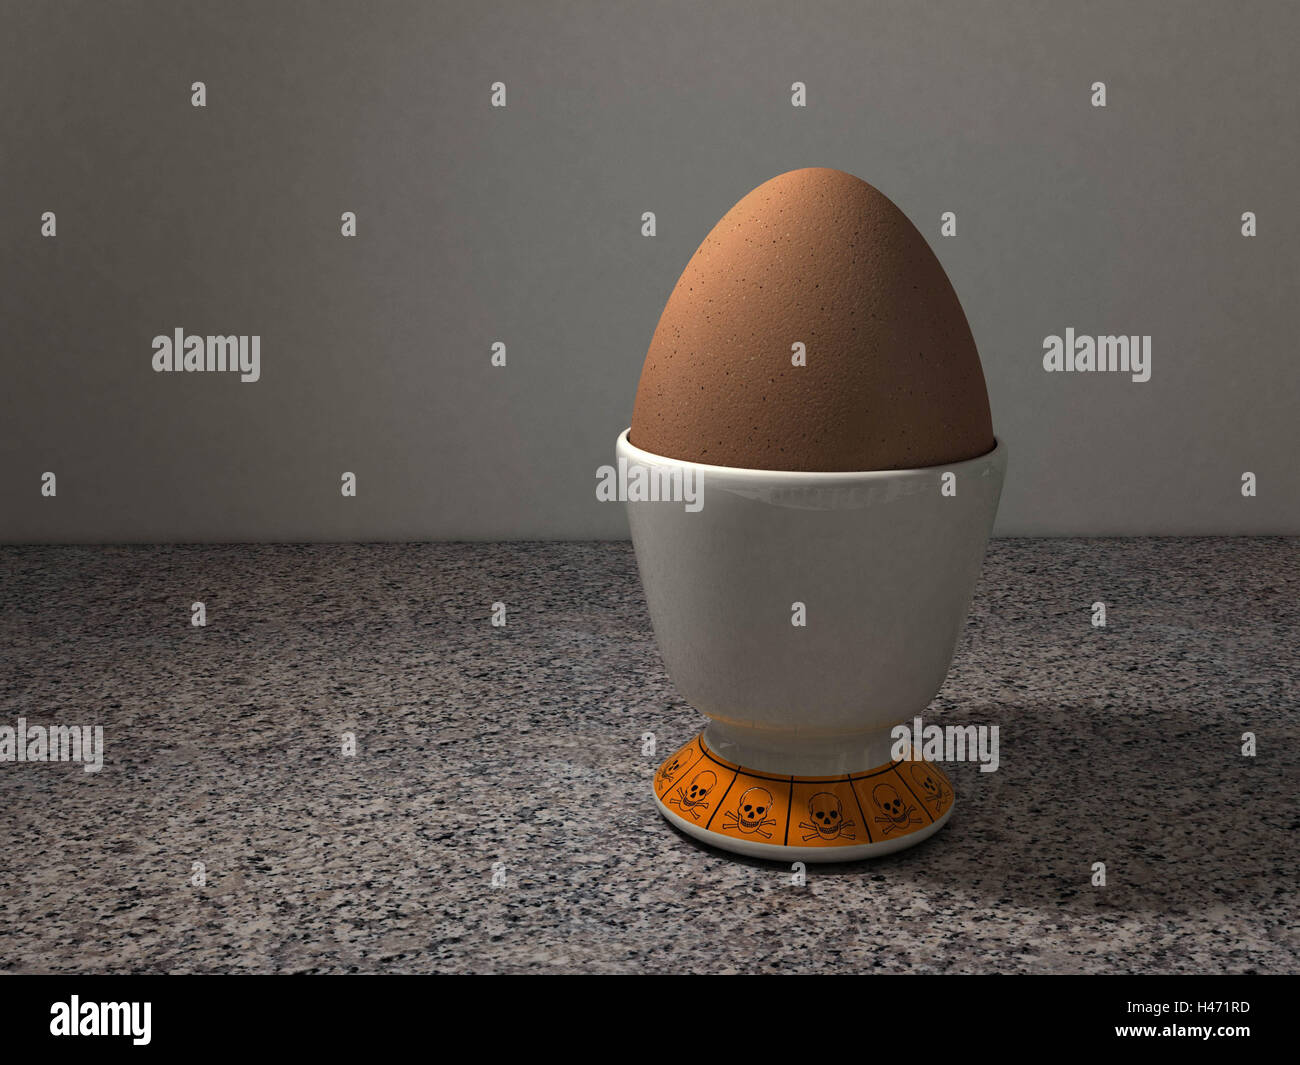 Oh, eggcup, poison, Dioxinei, dioxin egg, dioxin, food, scandal, dioxin scandal, dioxin scandal, impurity, animal lining, egg, poultry egg, icon, death's-head, poisons, eggcup, Stock Photo